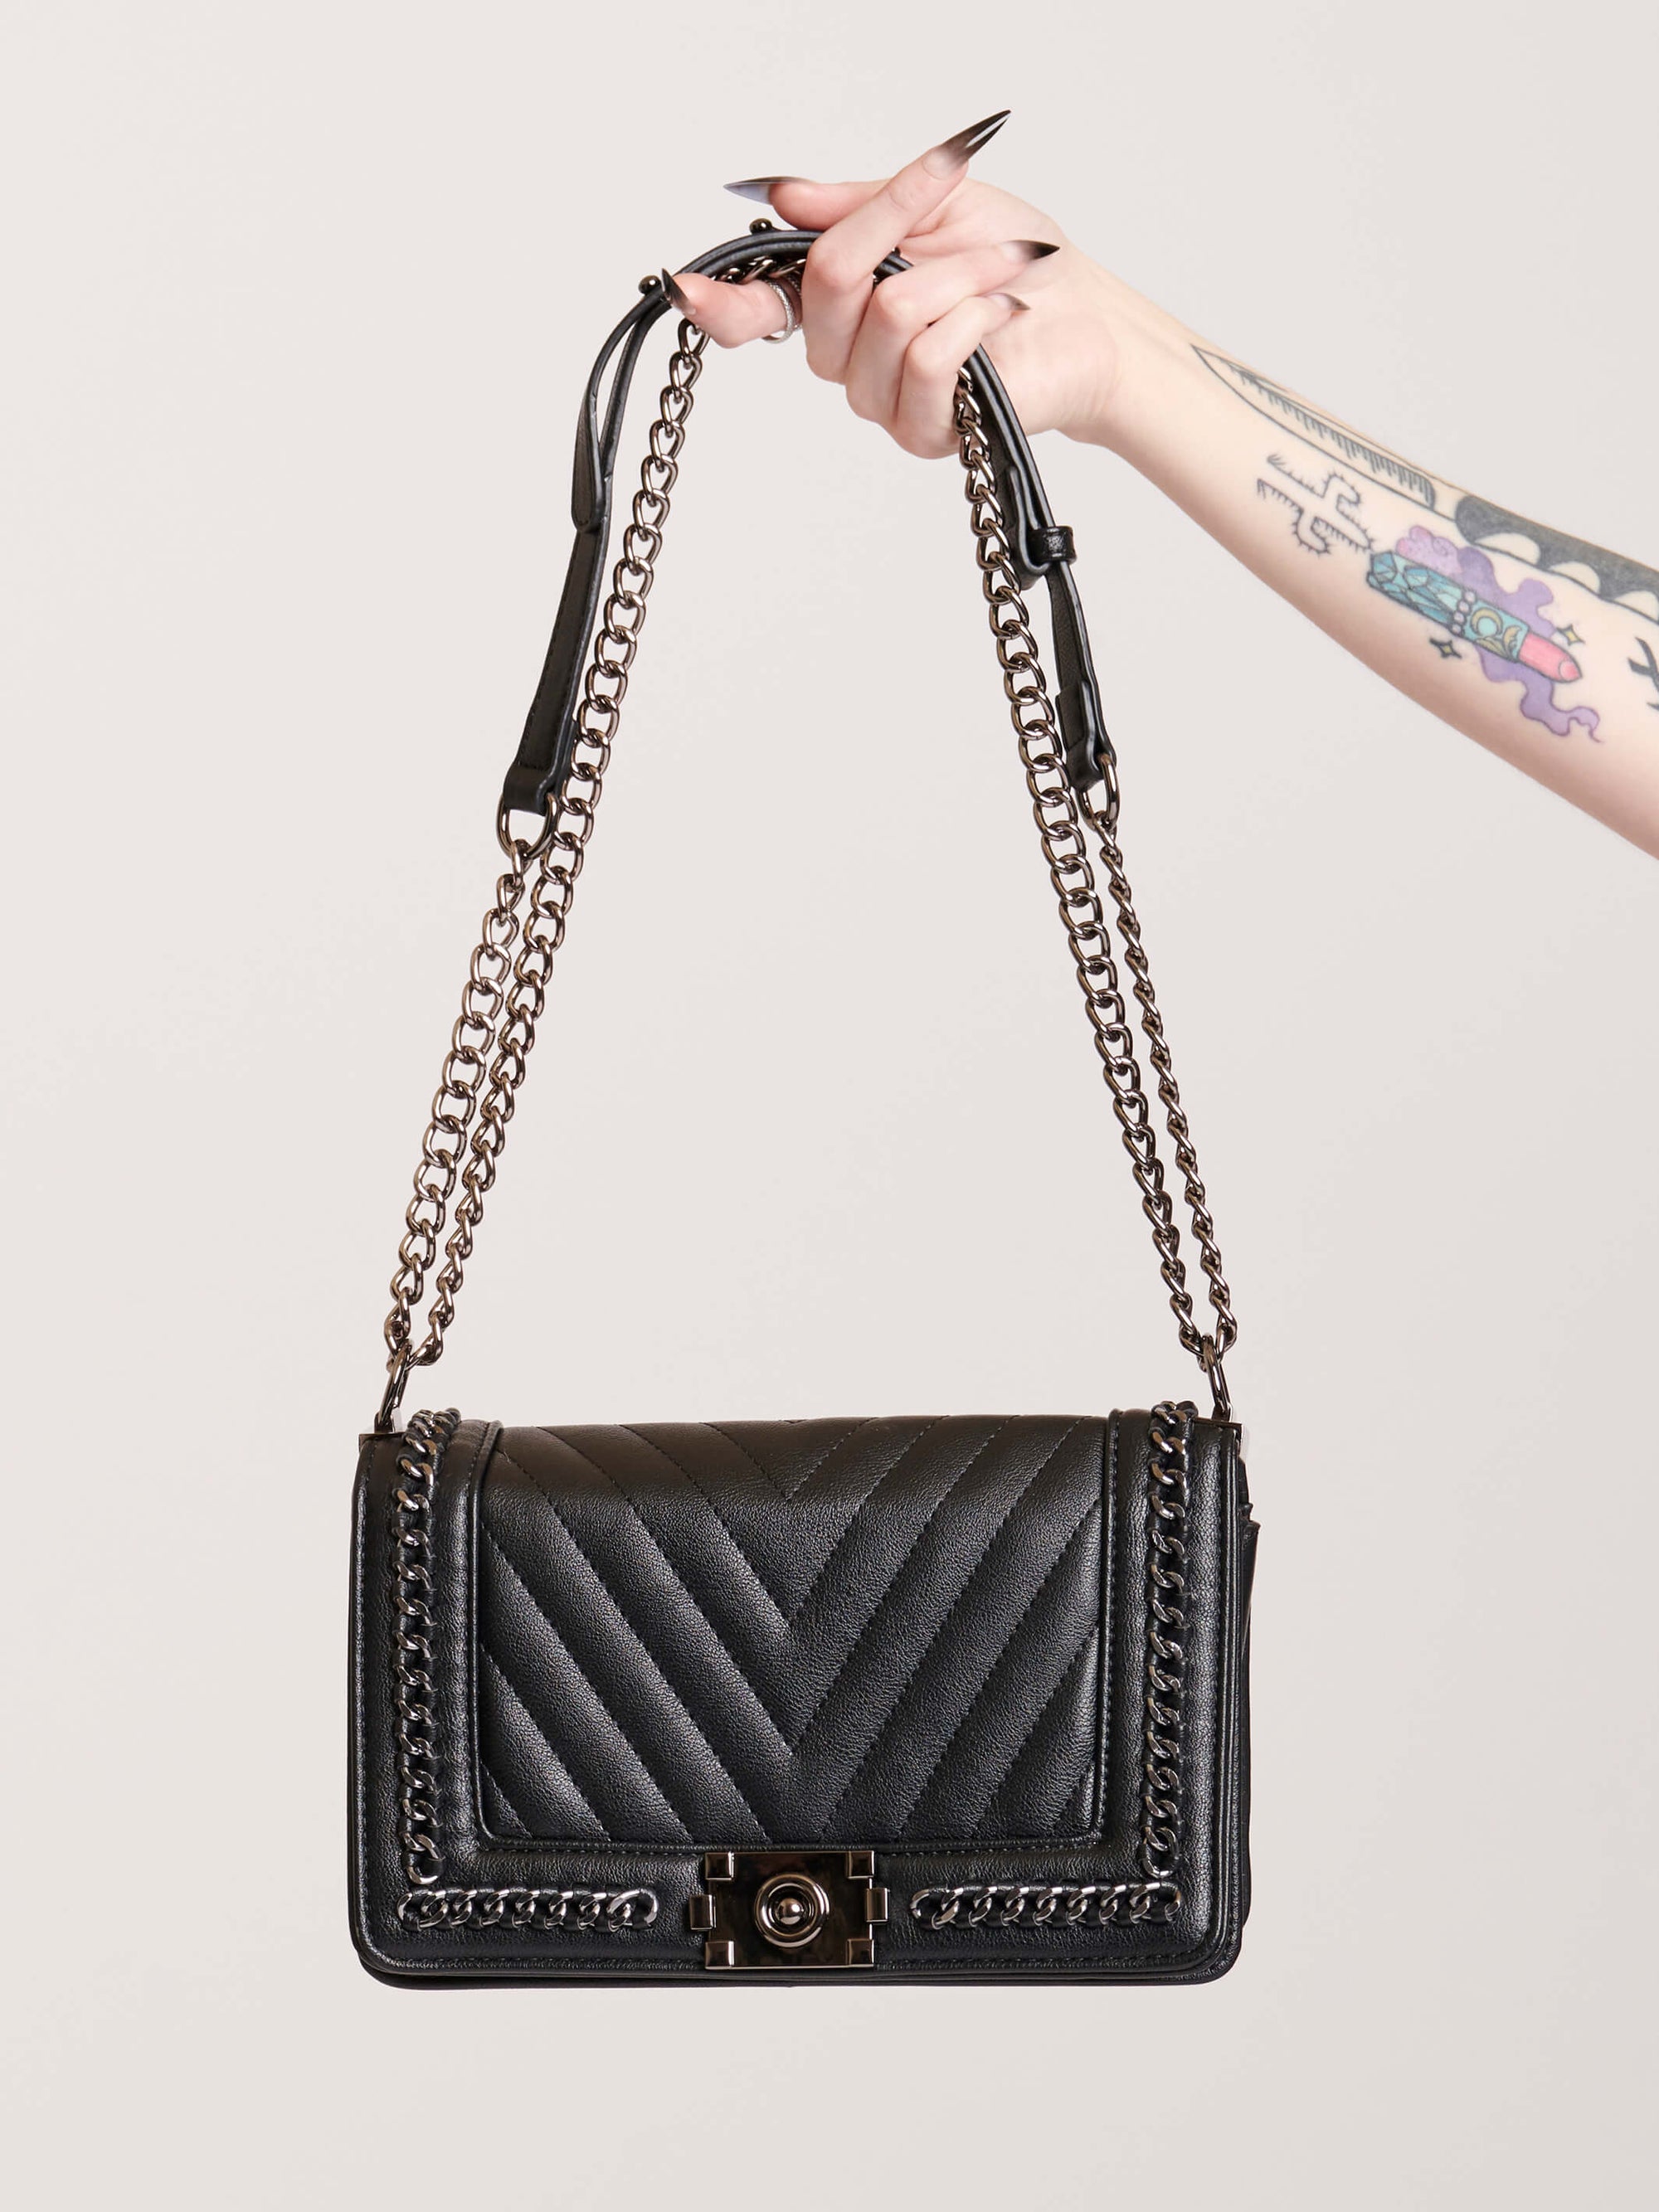 Black quilted purse with silver chain detail